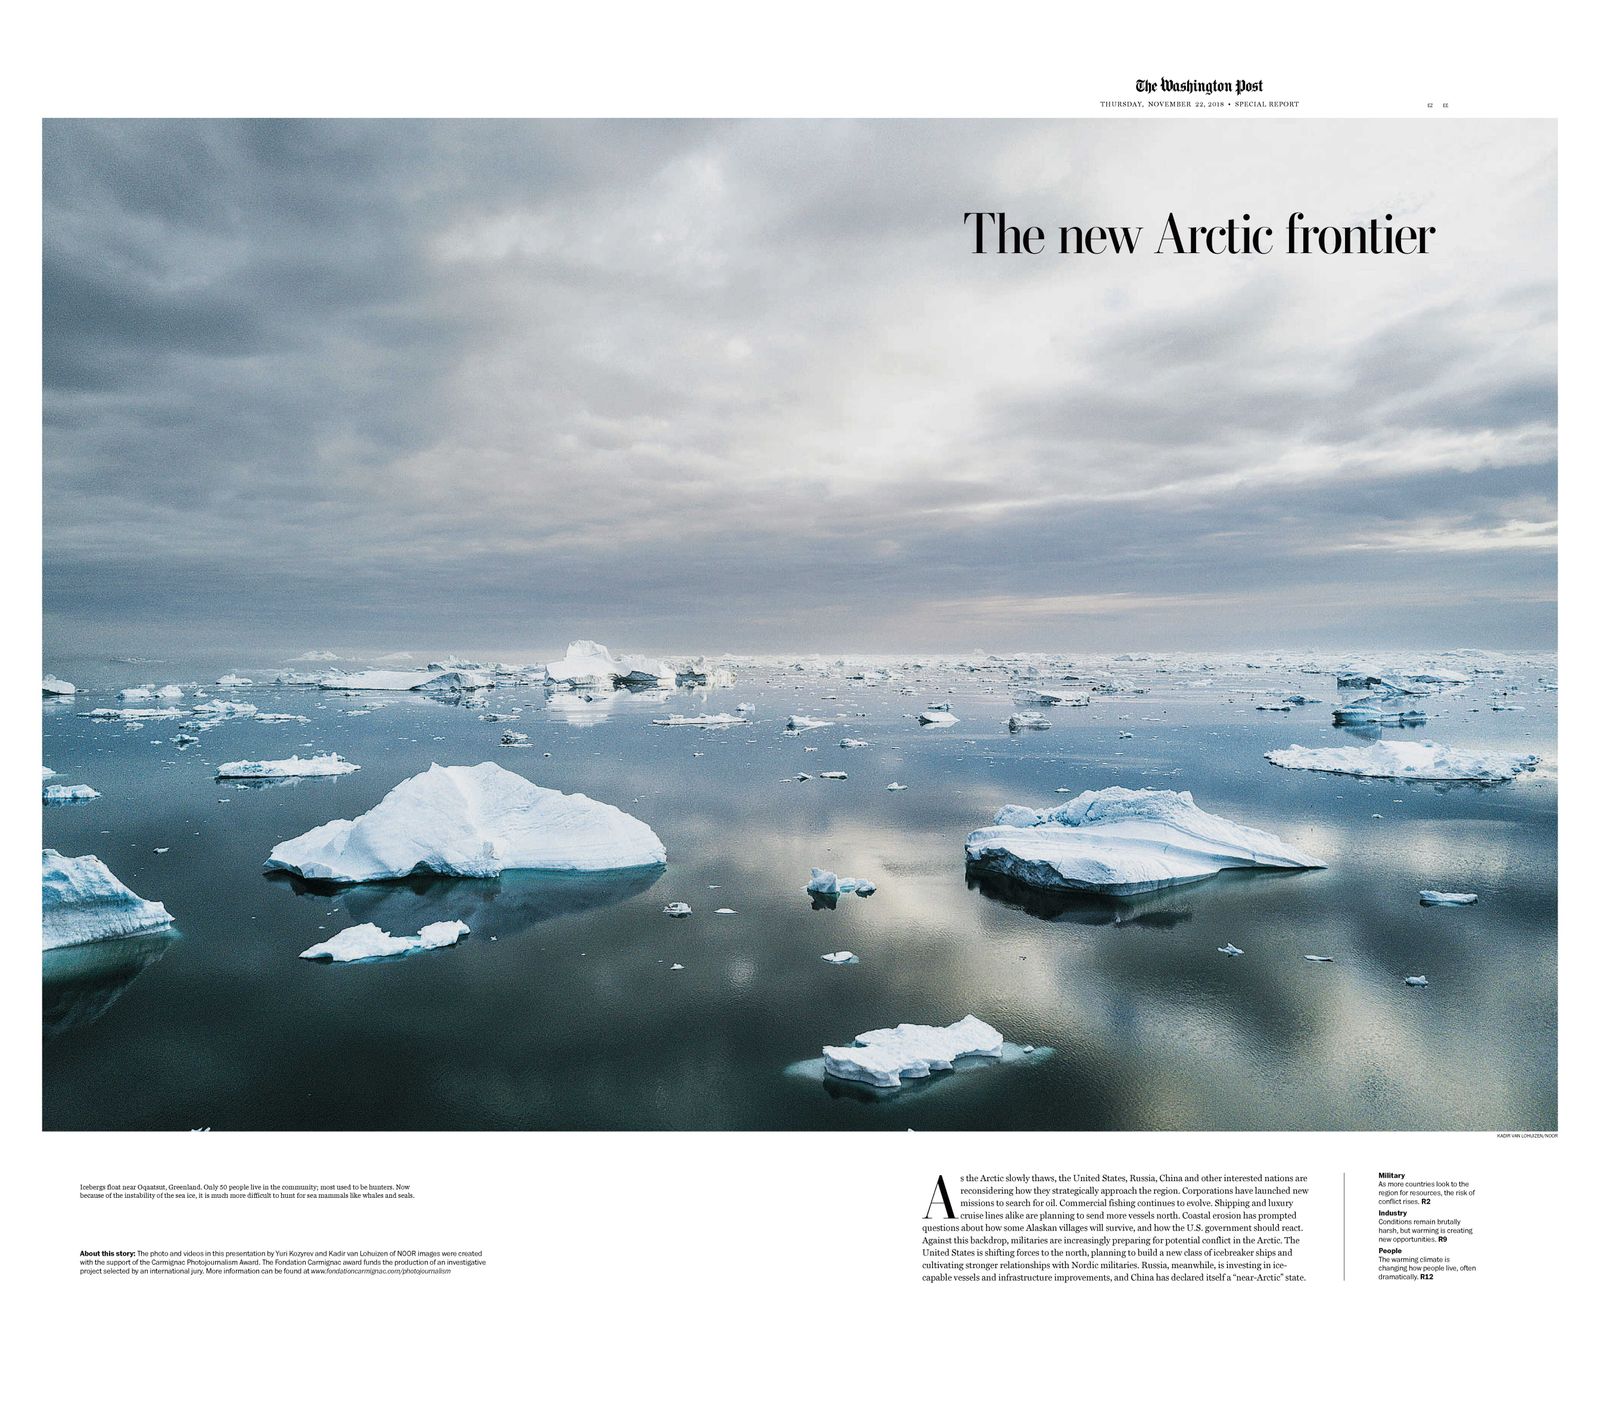 From The Washington Post feature The New Arctic Frontier, edited by Nick Kirkpatrick